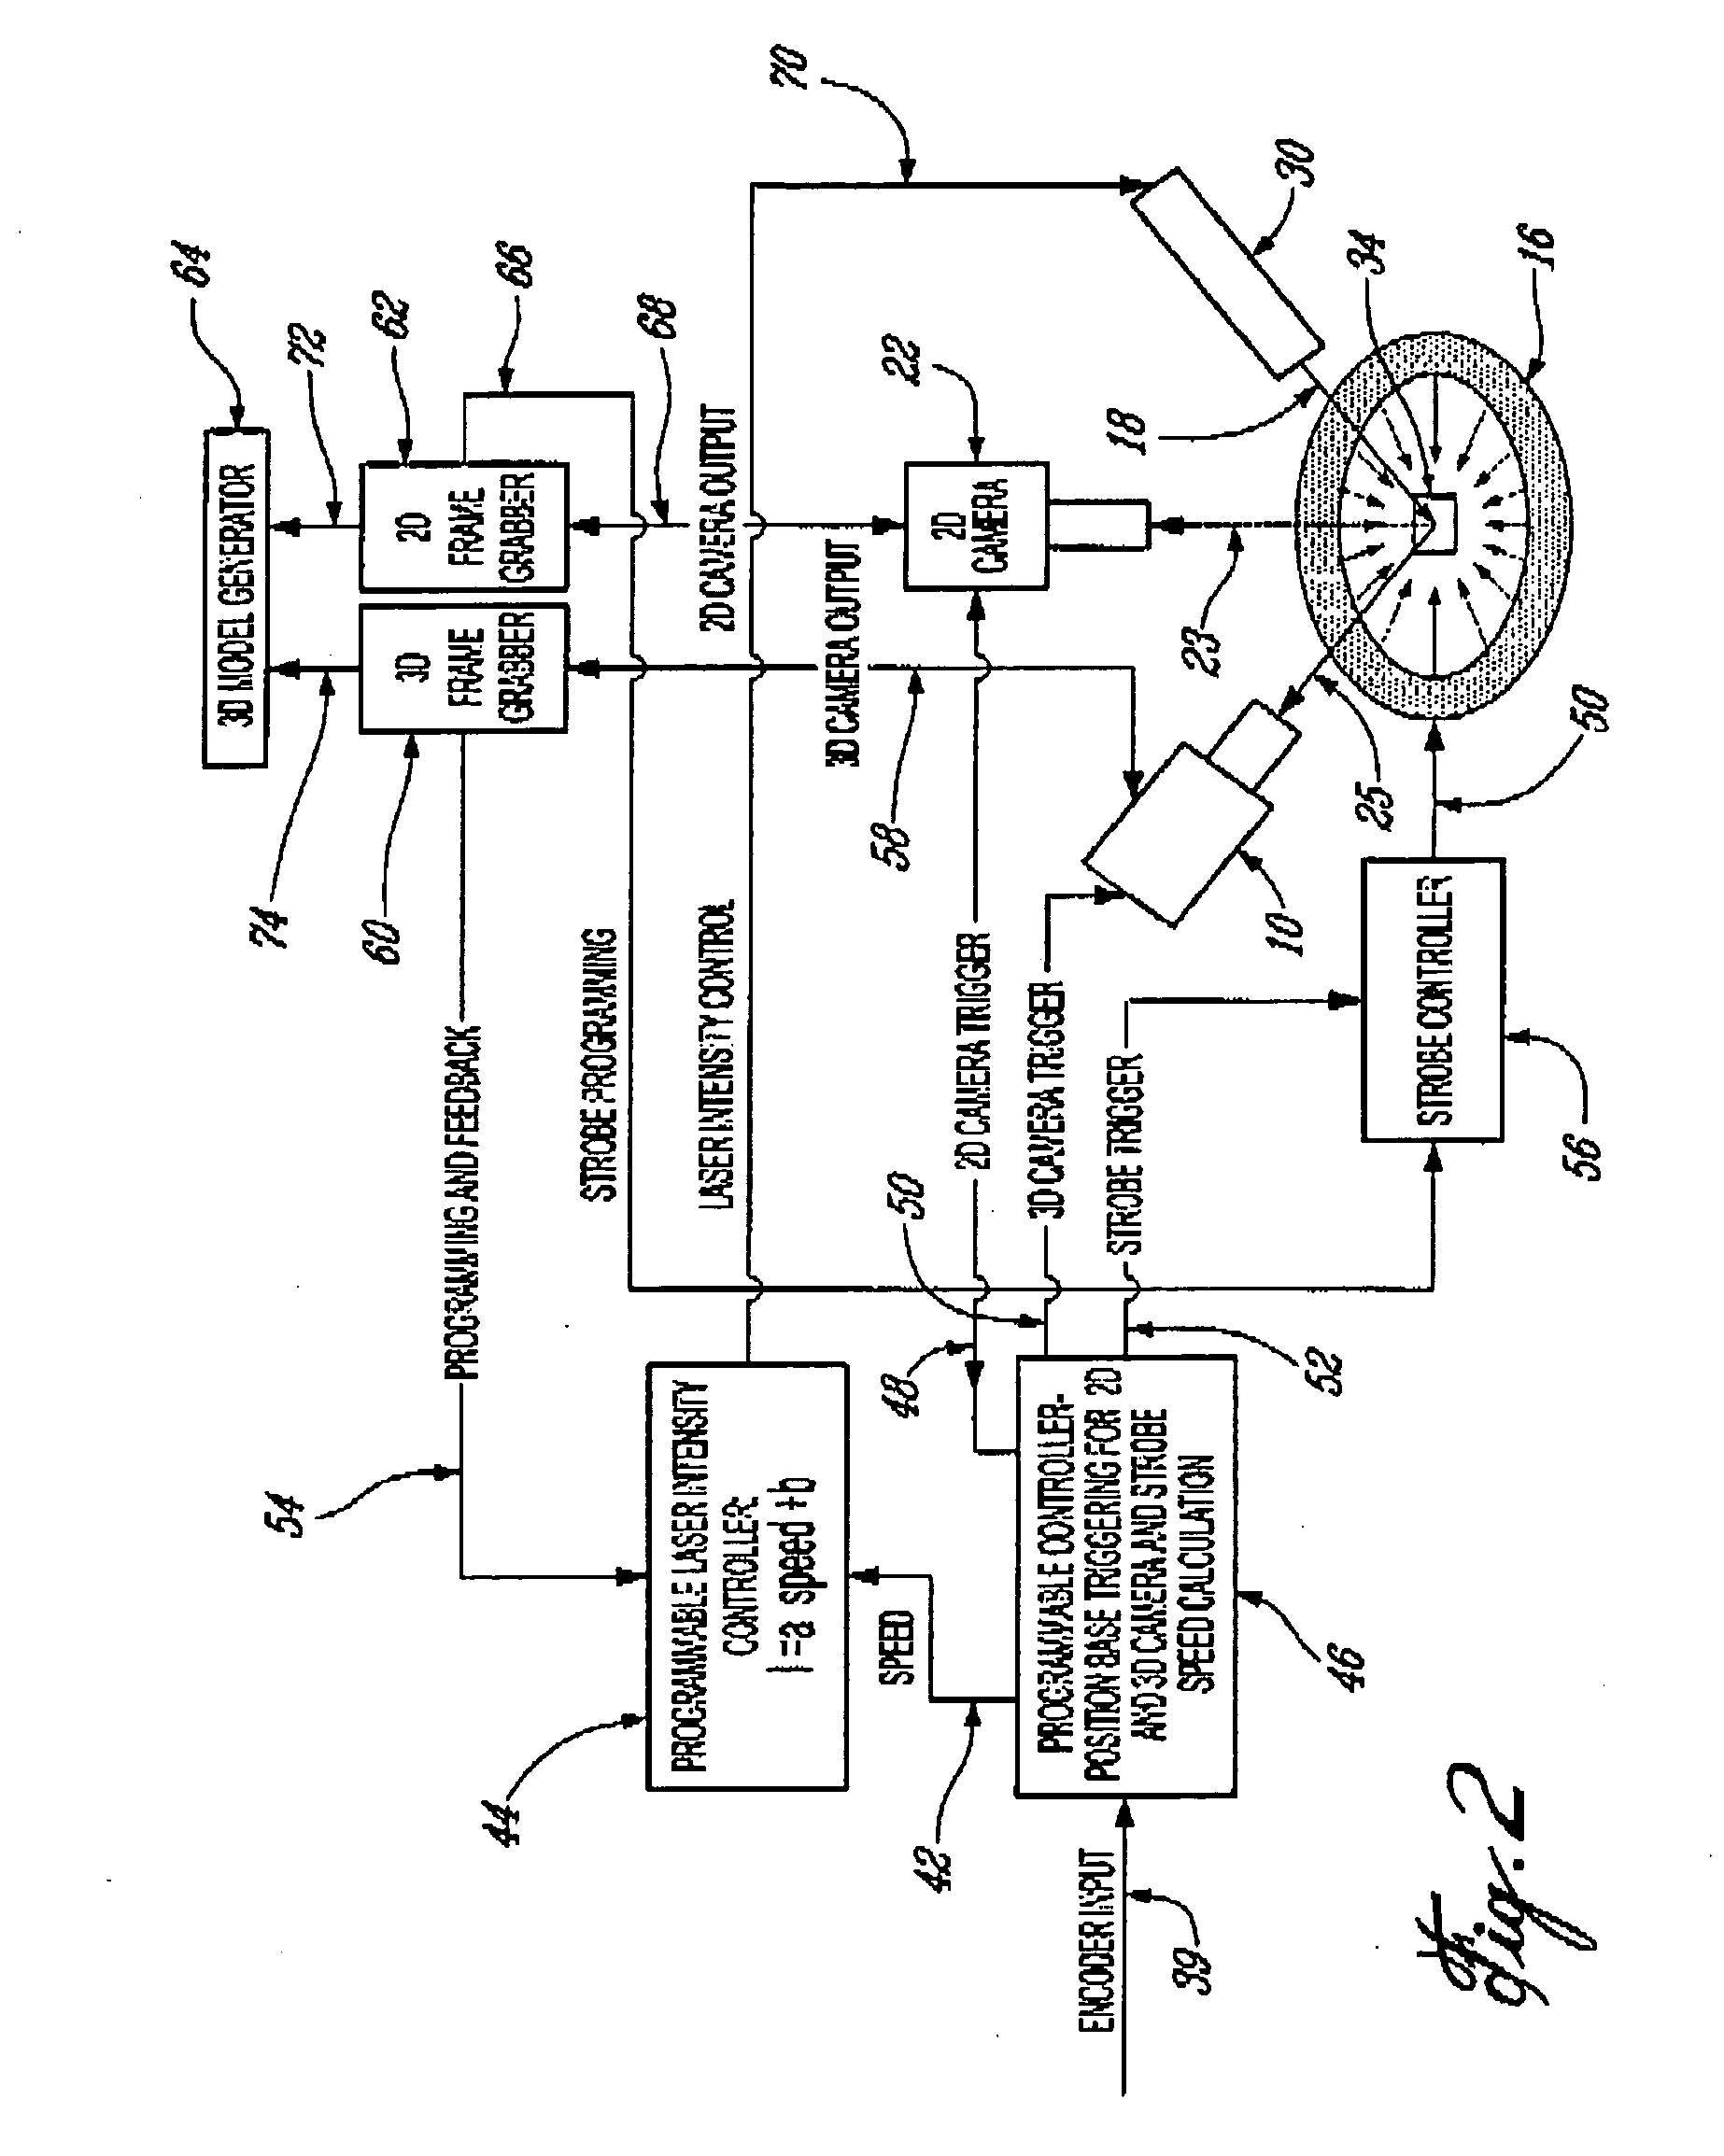 Method and an apparatus for simultaneous 2D and 3D optical inspection and acquisition of optical inspection data of an object